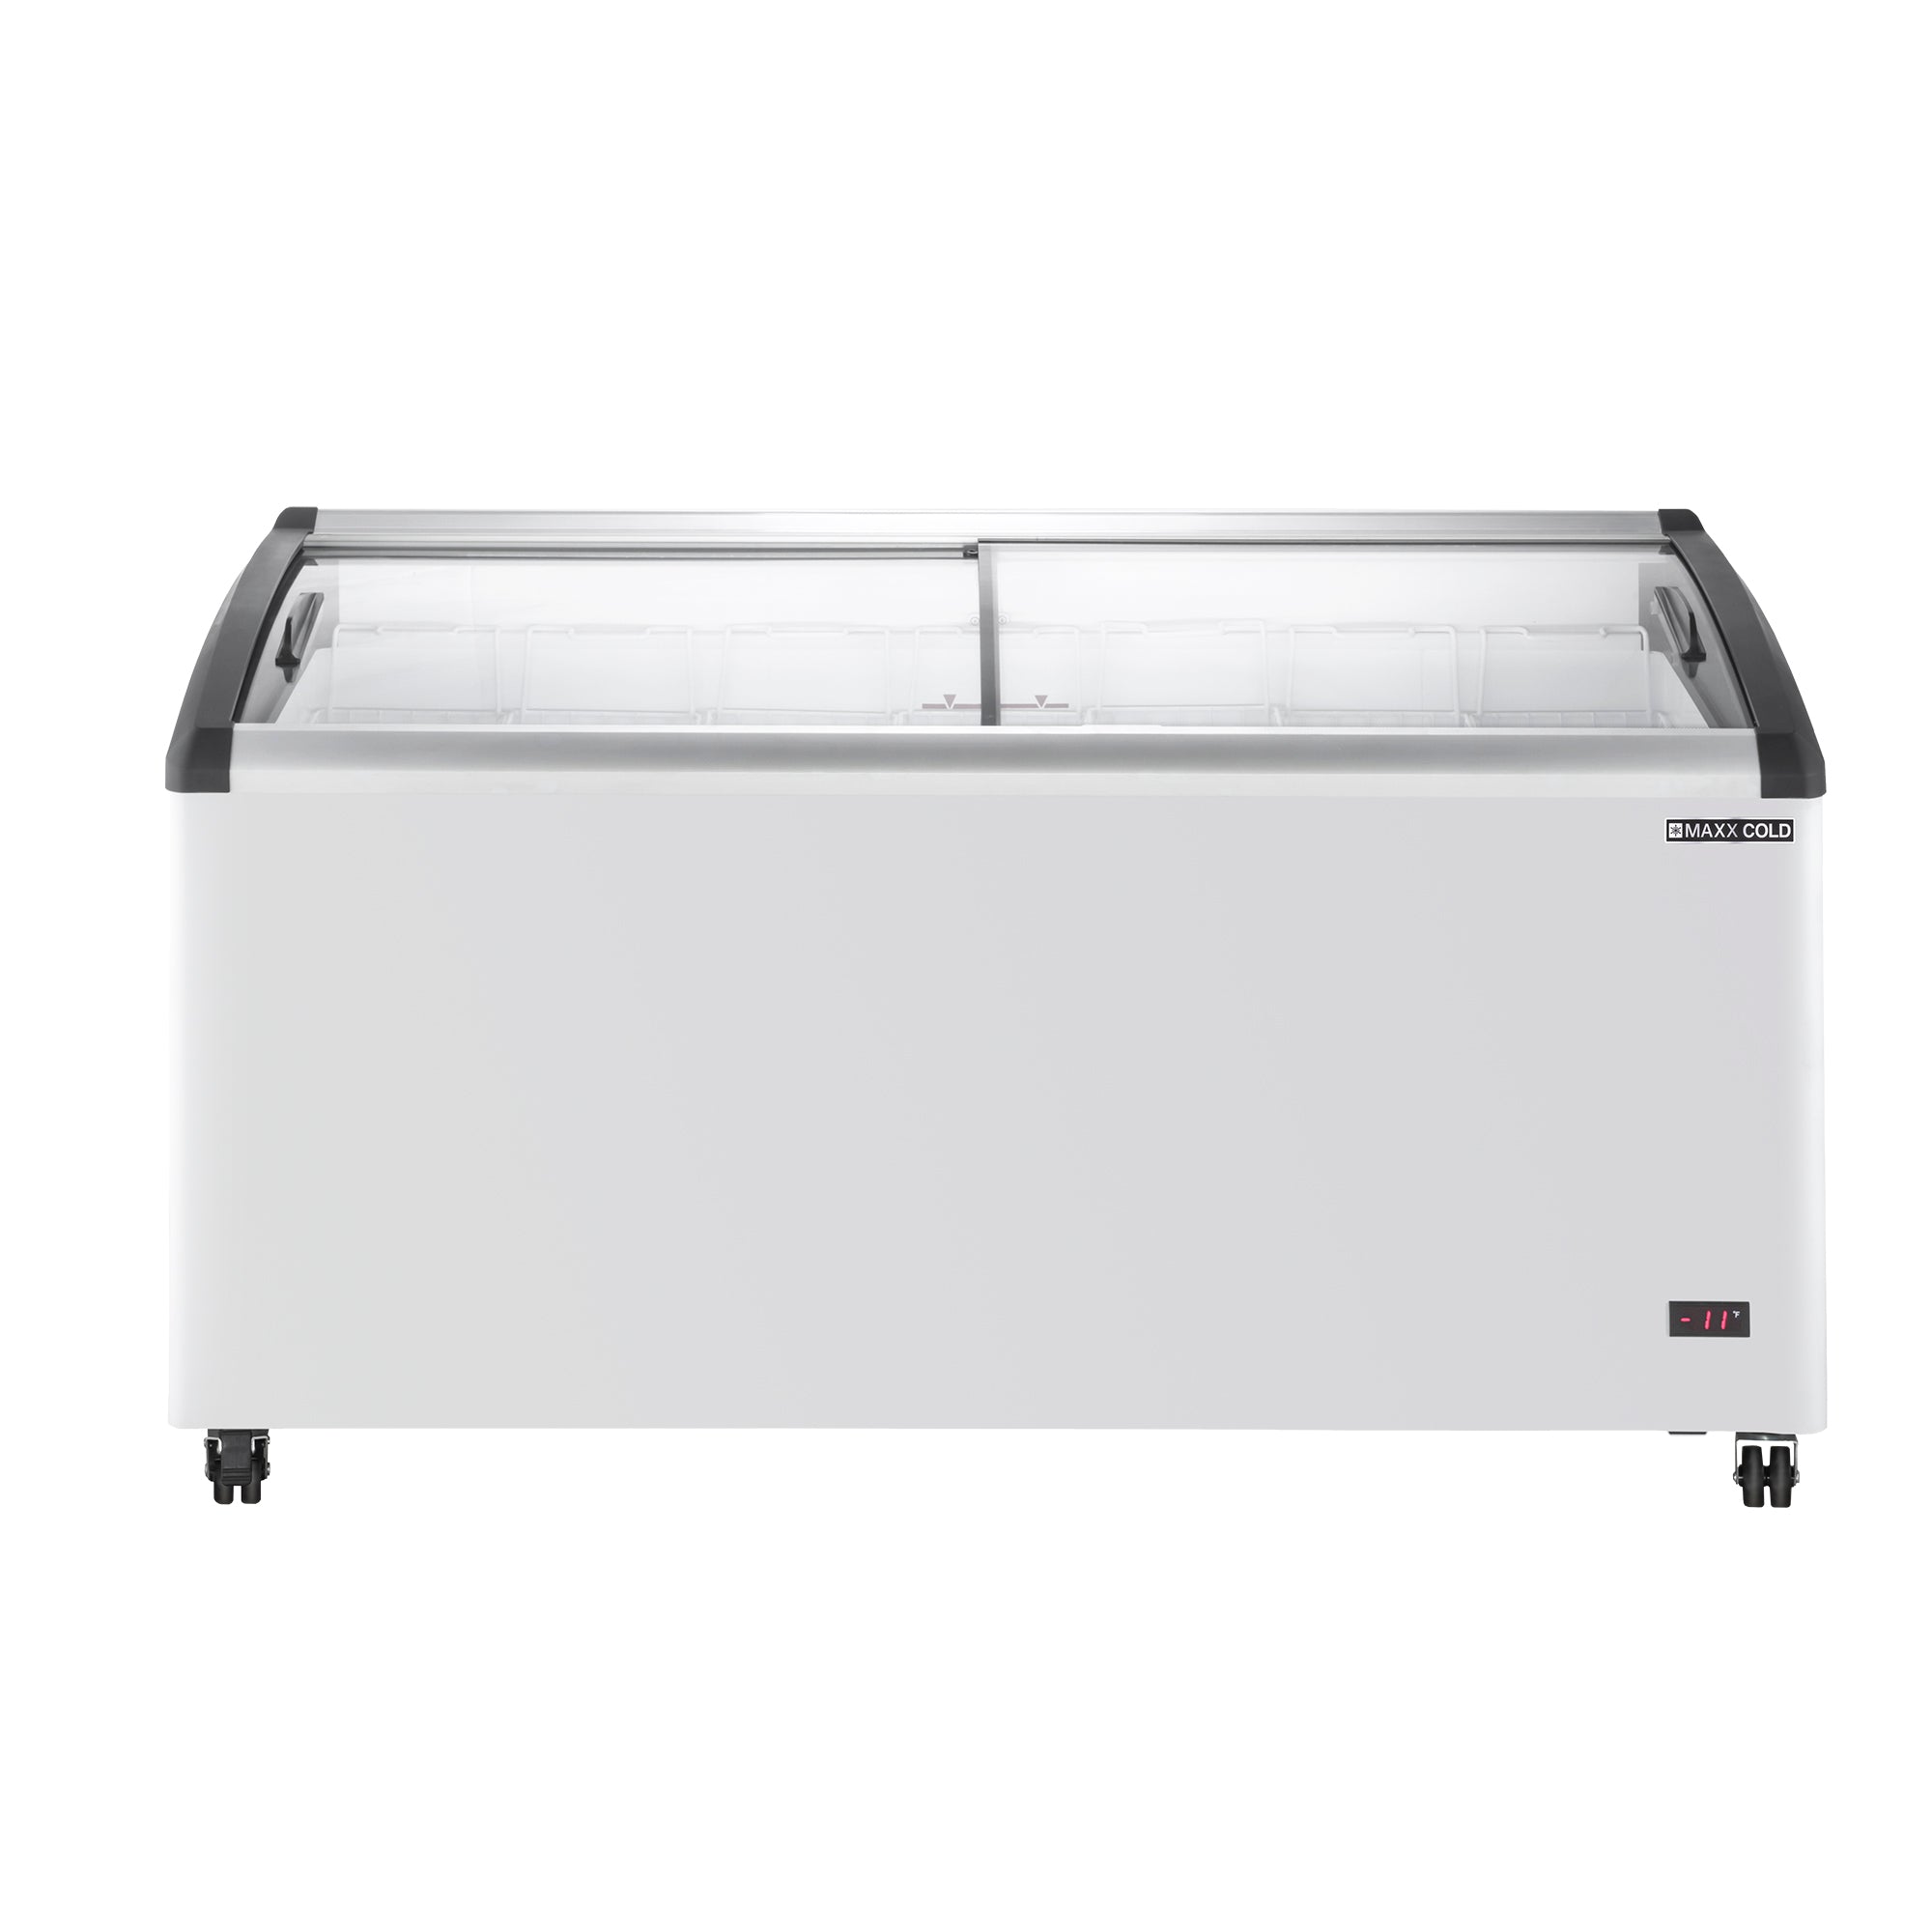 Maxx Cold - MXF64CHC-7, Maxx Cold Curved Glass Top Chest Freezer Display, 63.4"W, 12.36 cu. ft. Storage Capacity, Equipped with (7) Wire Baskets, in White